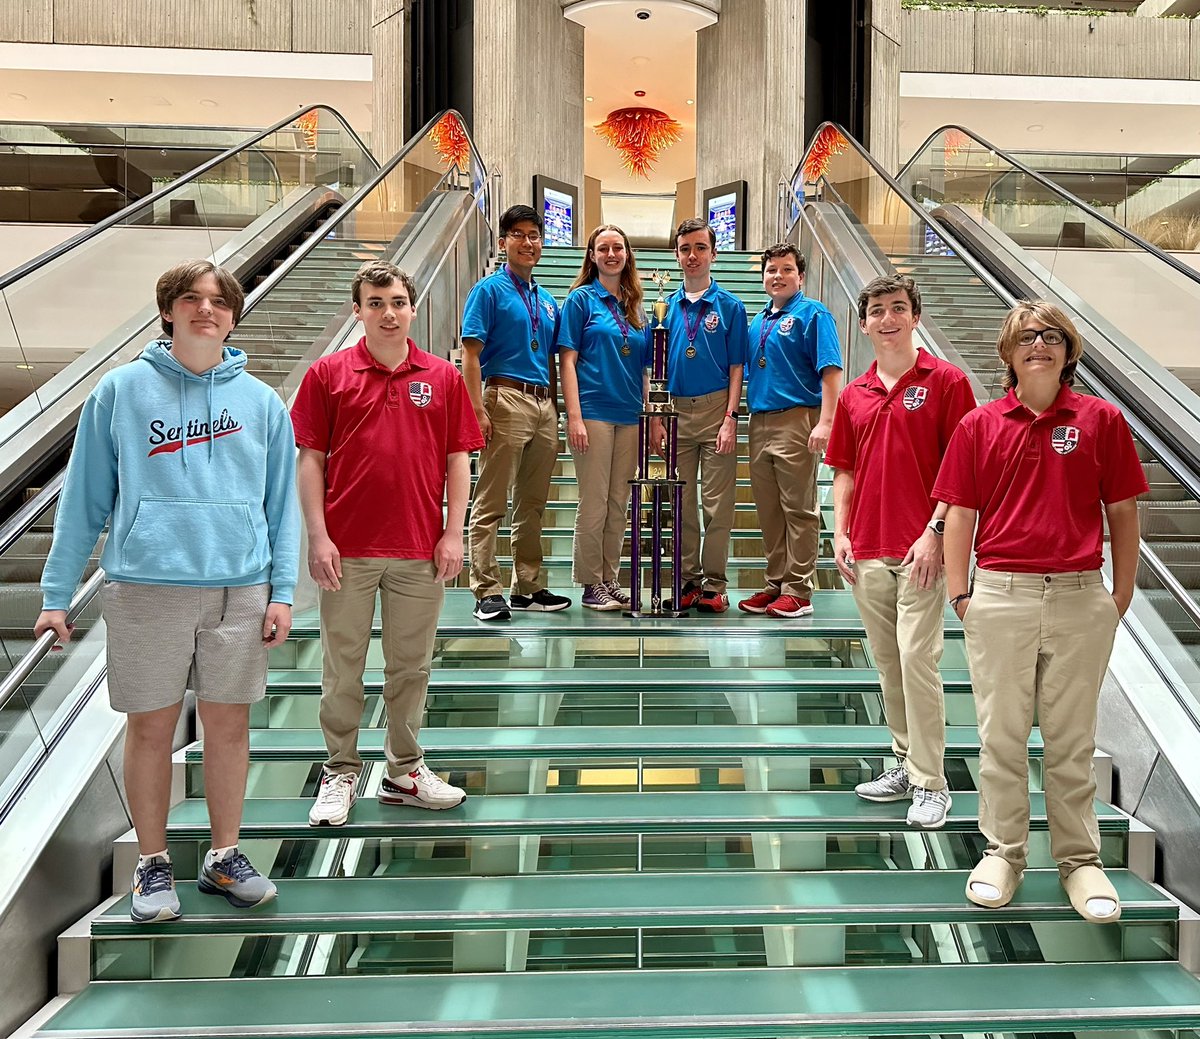 Congratulations to the ASCTE Scholars’ Bowl team for their impressive performance at the Small School National Championship Tournament, placing 2nd in the nation! Special shoutout to Tate Osborne for being recognized as the top individual scorer and highest scorer overall.